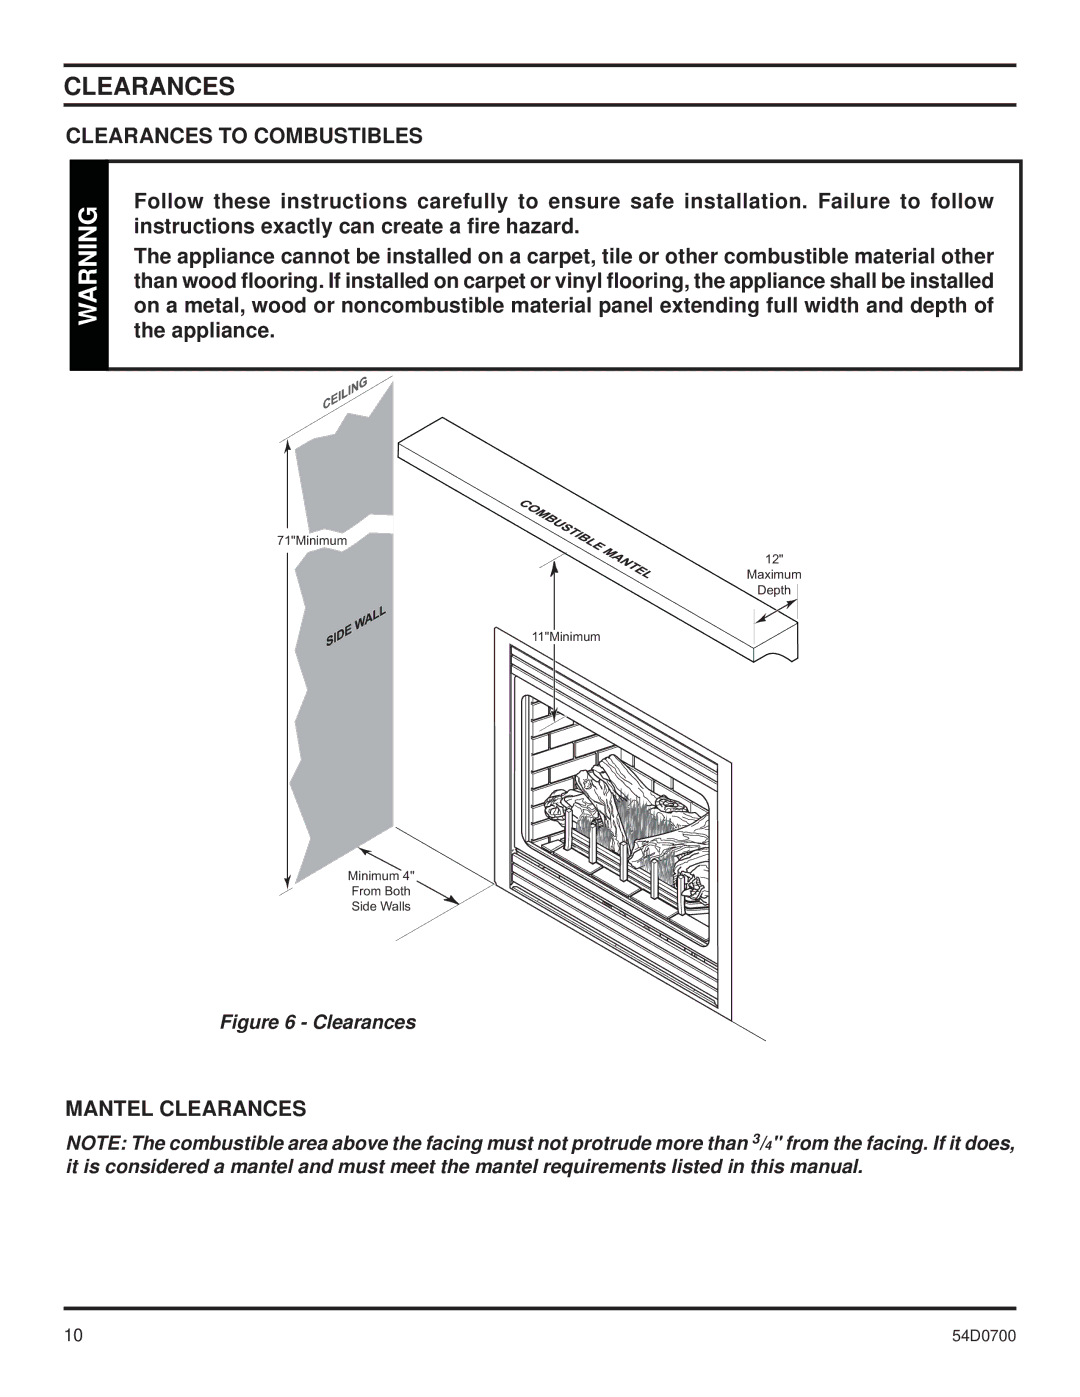 Monessen Hearth BDV300, BDV600, BDV500, BDV400 operating instructions Clearances to Combustibles, Mantel Clearances 